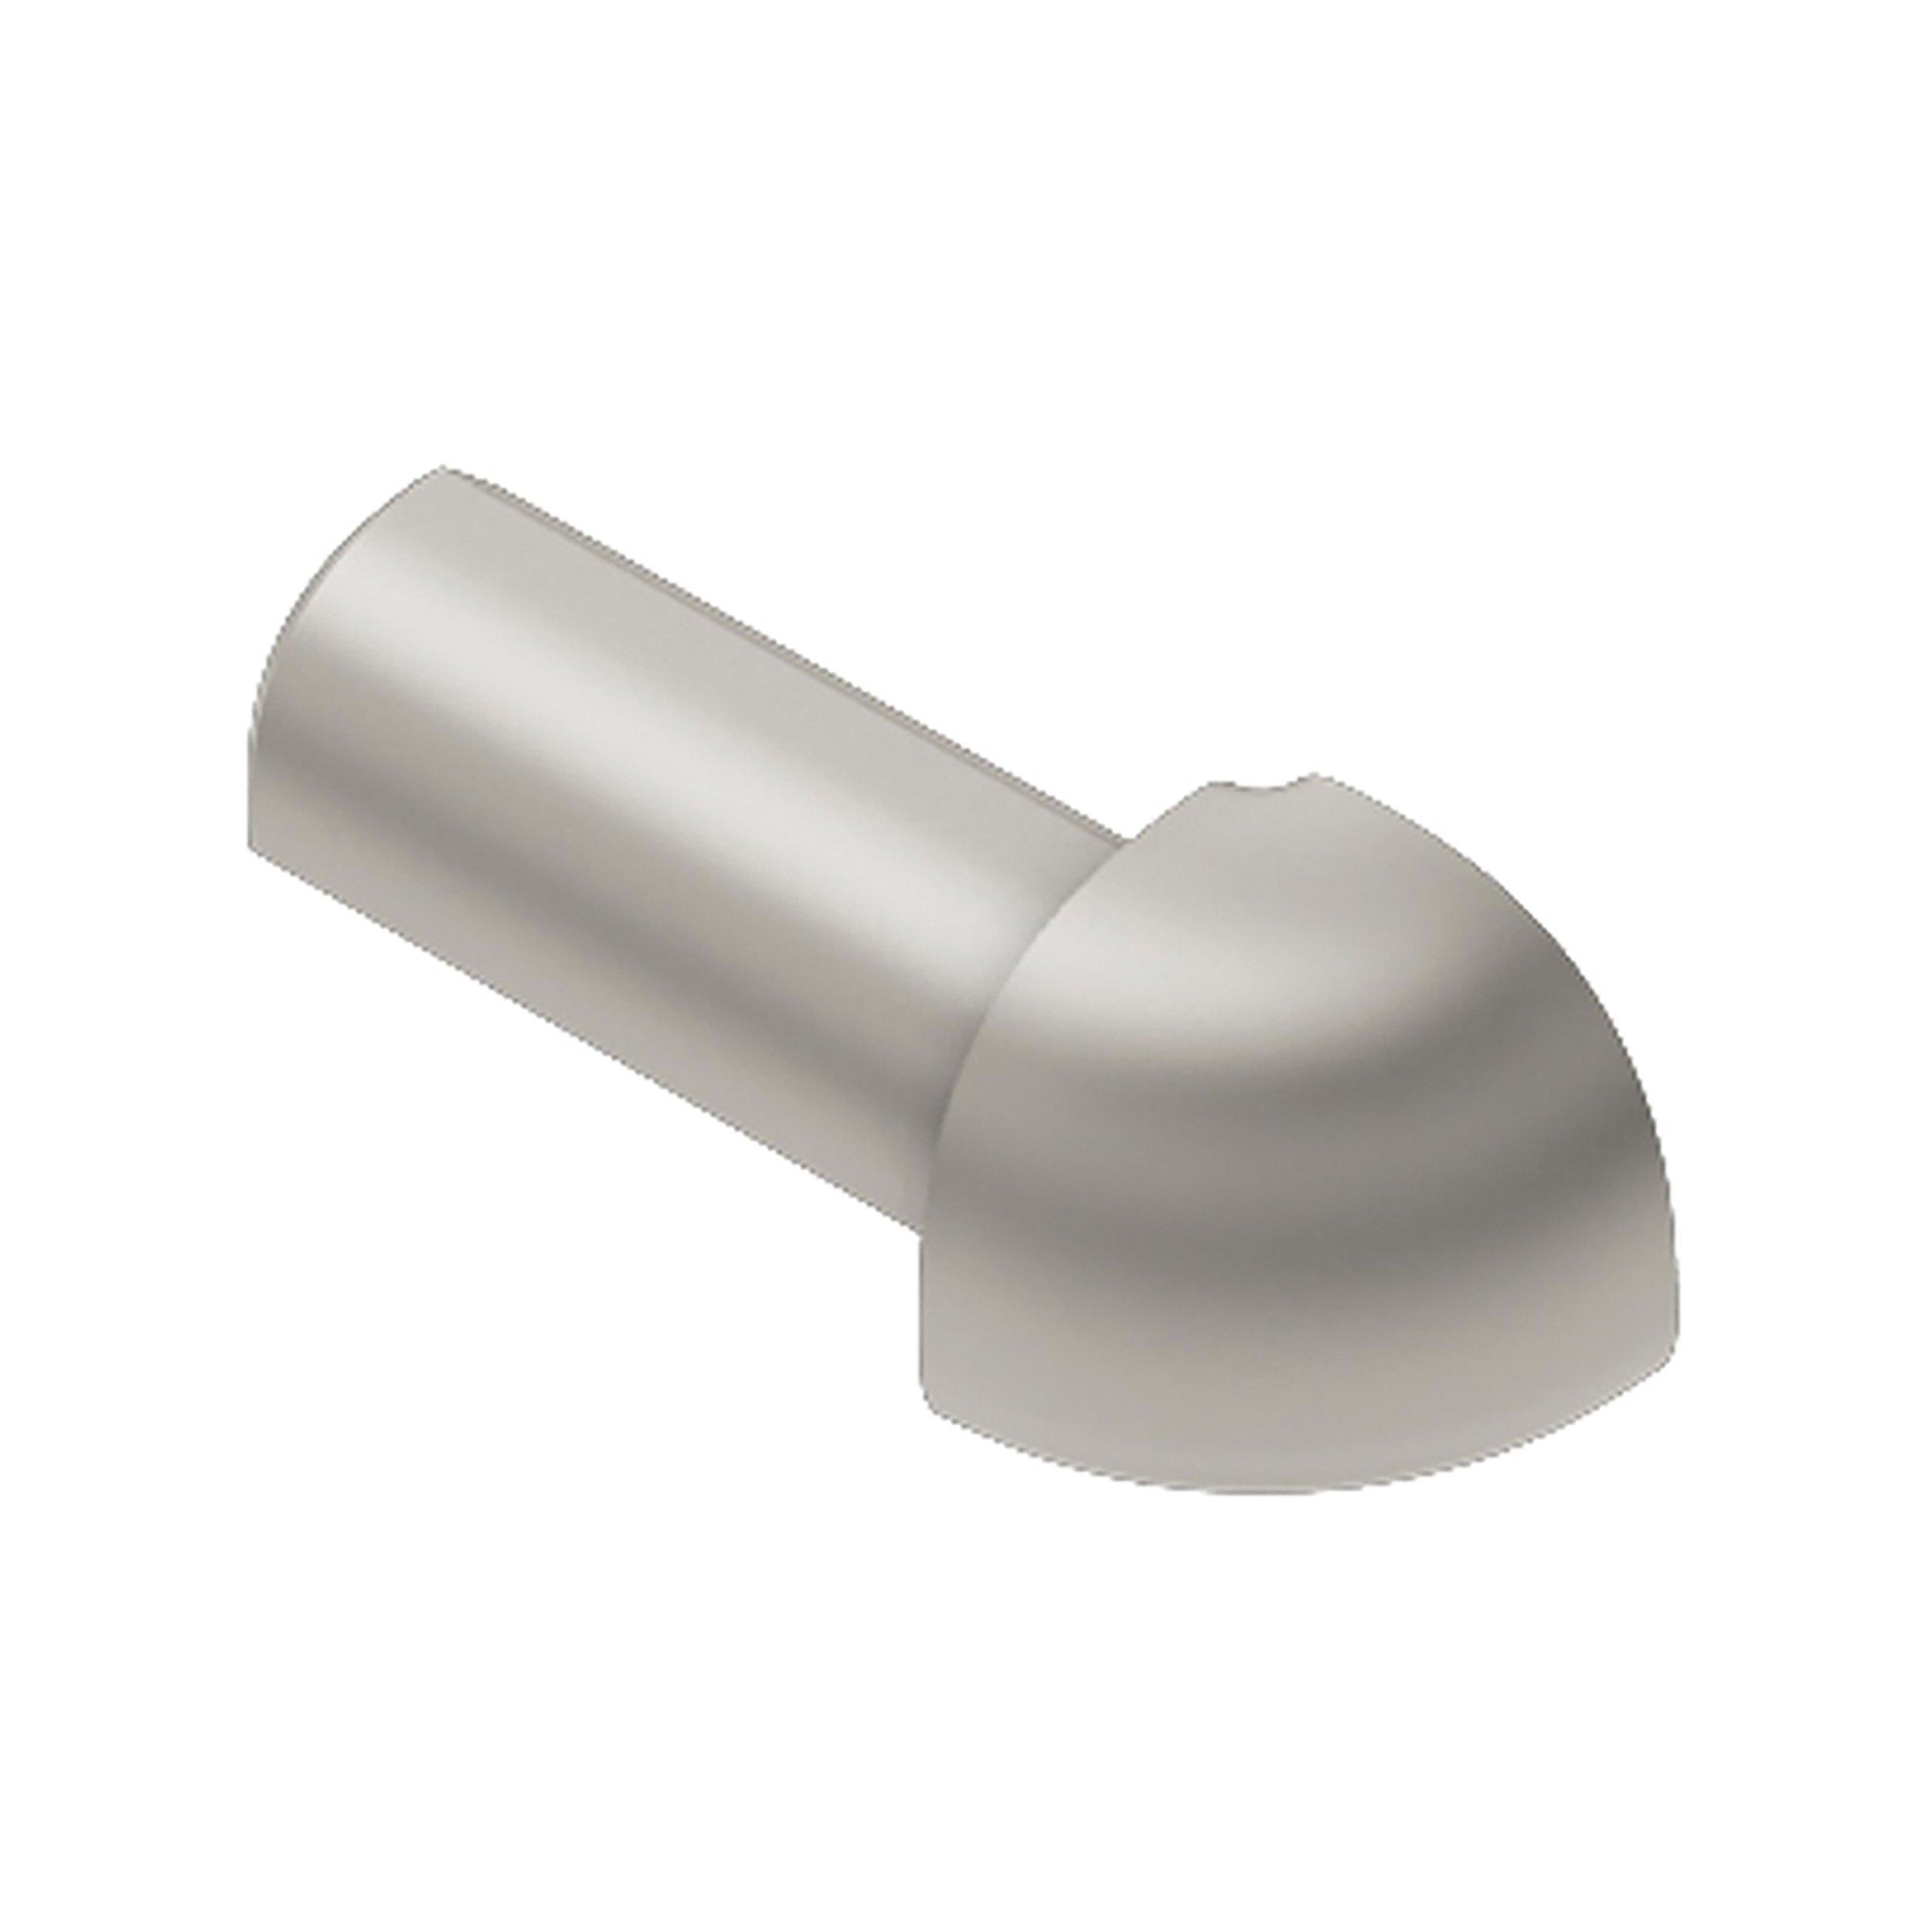 Schluter-Rondec Outside Corner for 3/8in. Satin Nickel Anodized Aluminum Rondec Profile